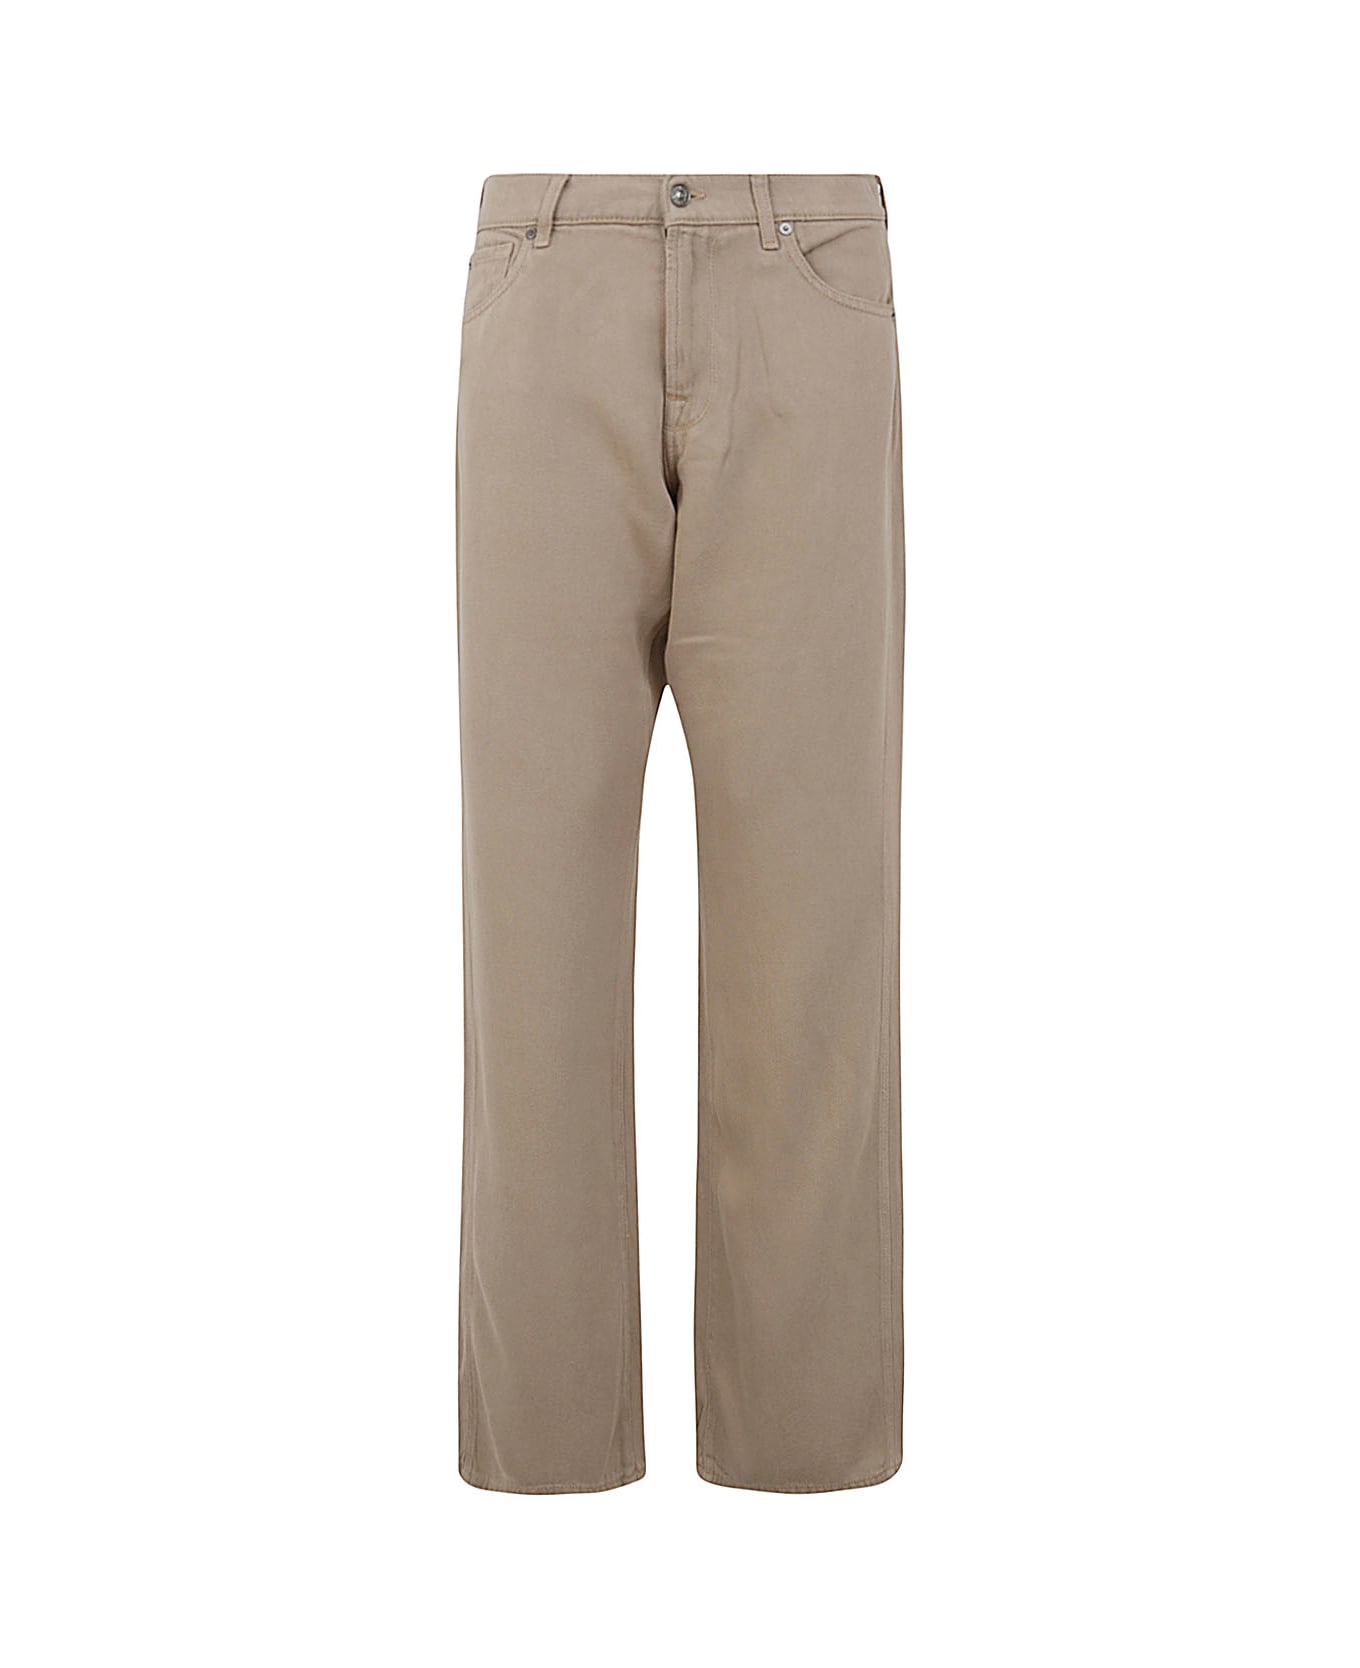 7 For All Mankind Tess Trouser Colored Tencel Sand - Beige